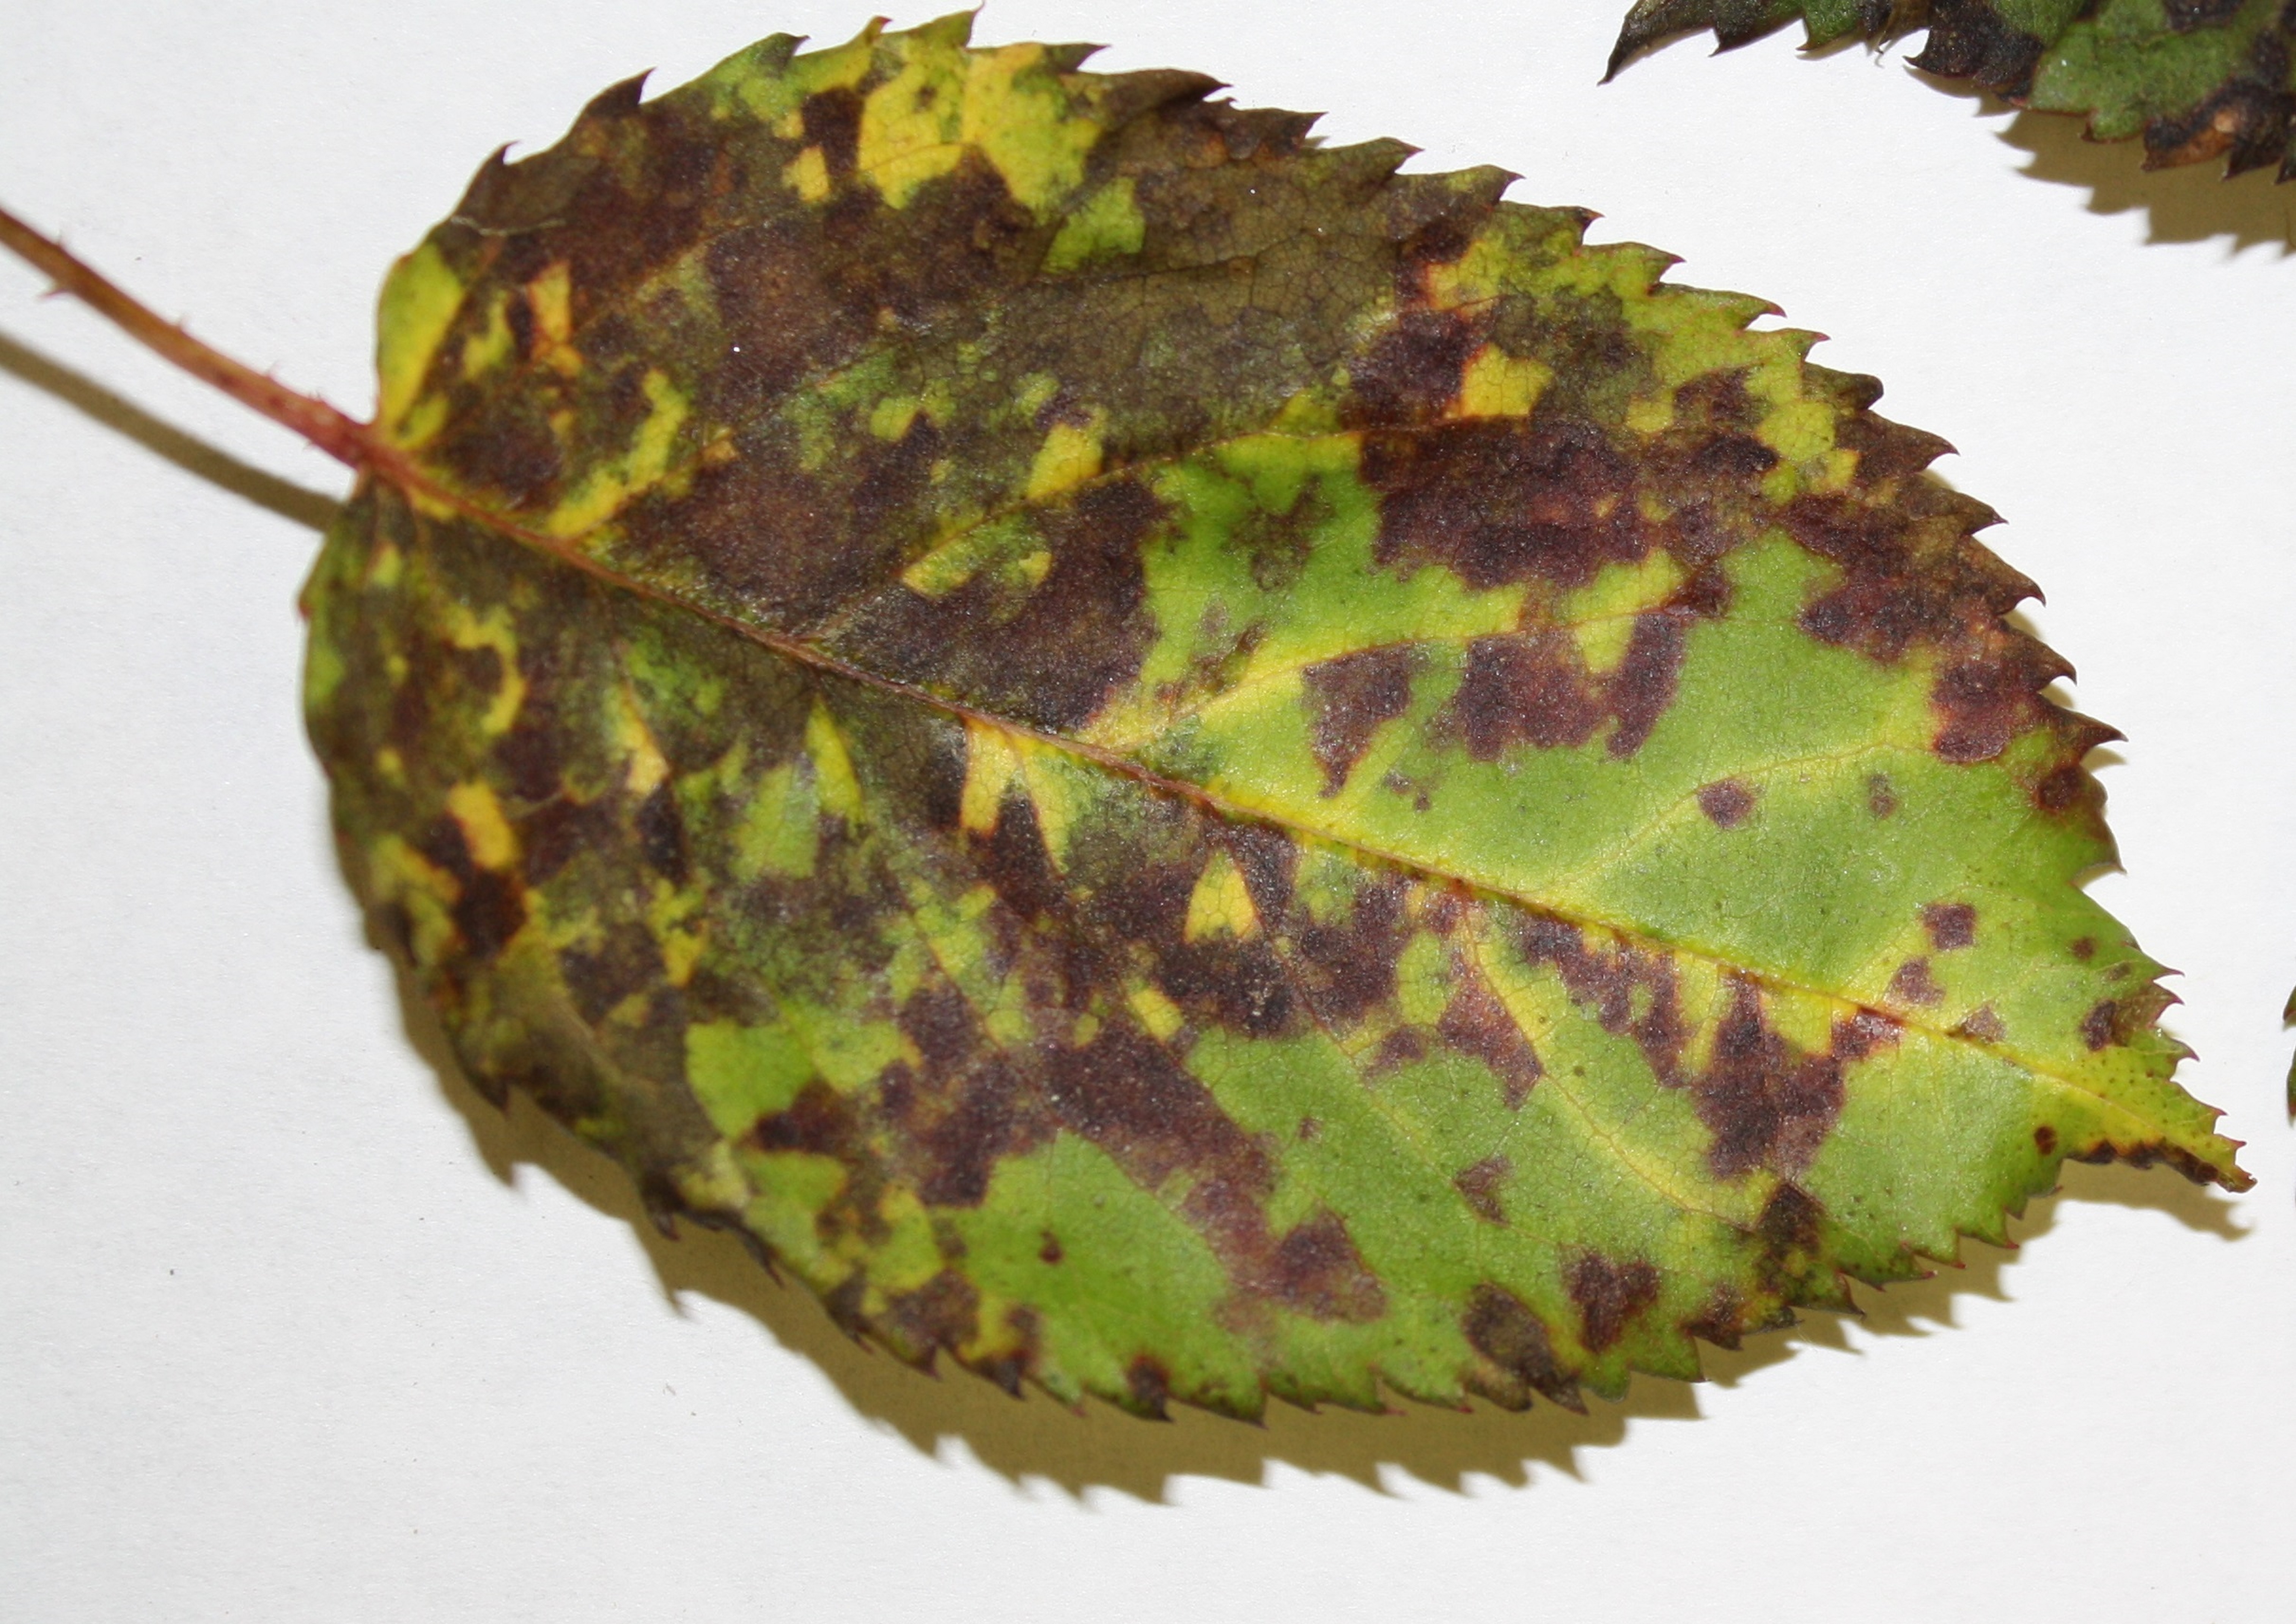 Leaf Spot Disease of Trees and Shrubs